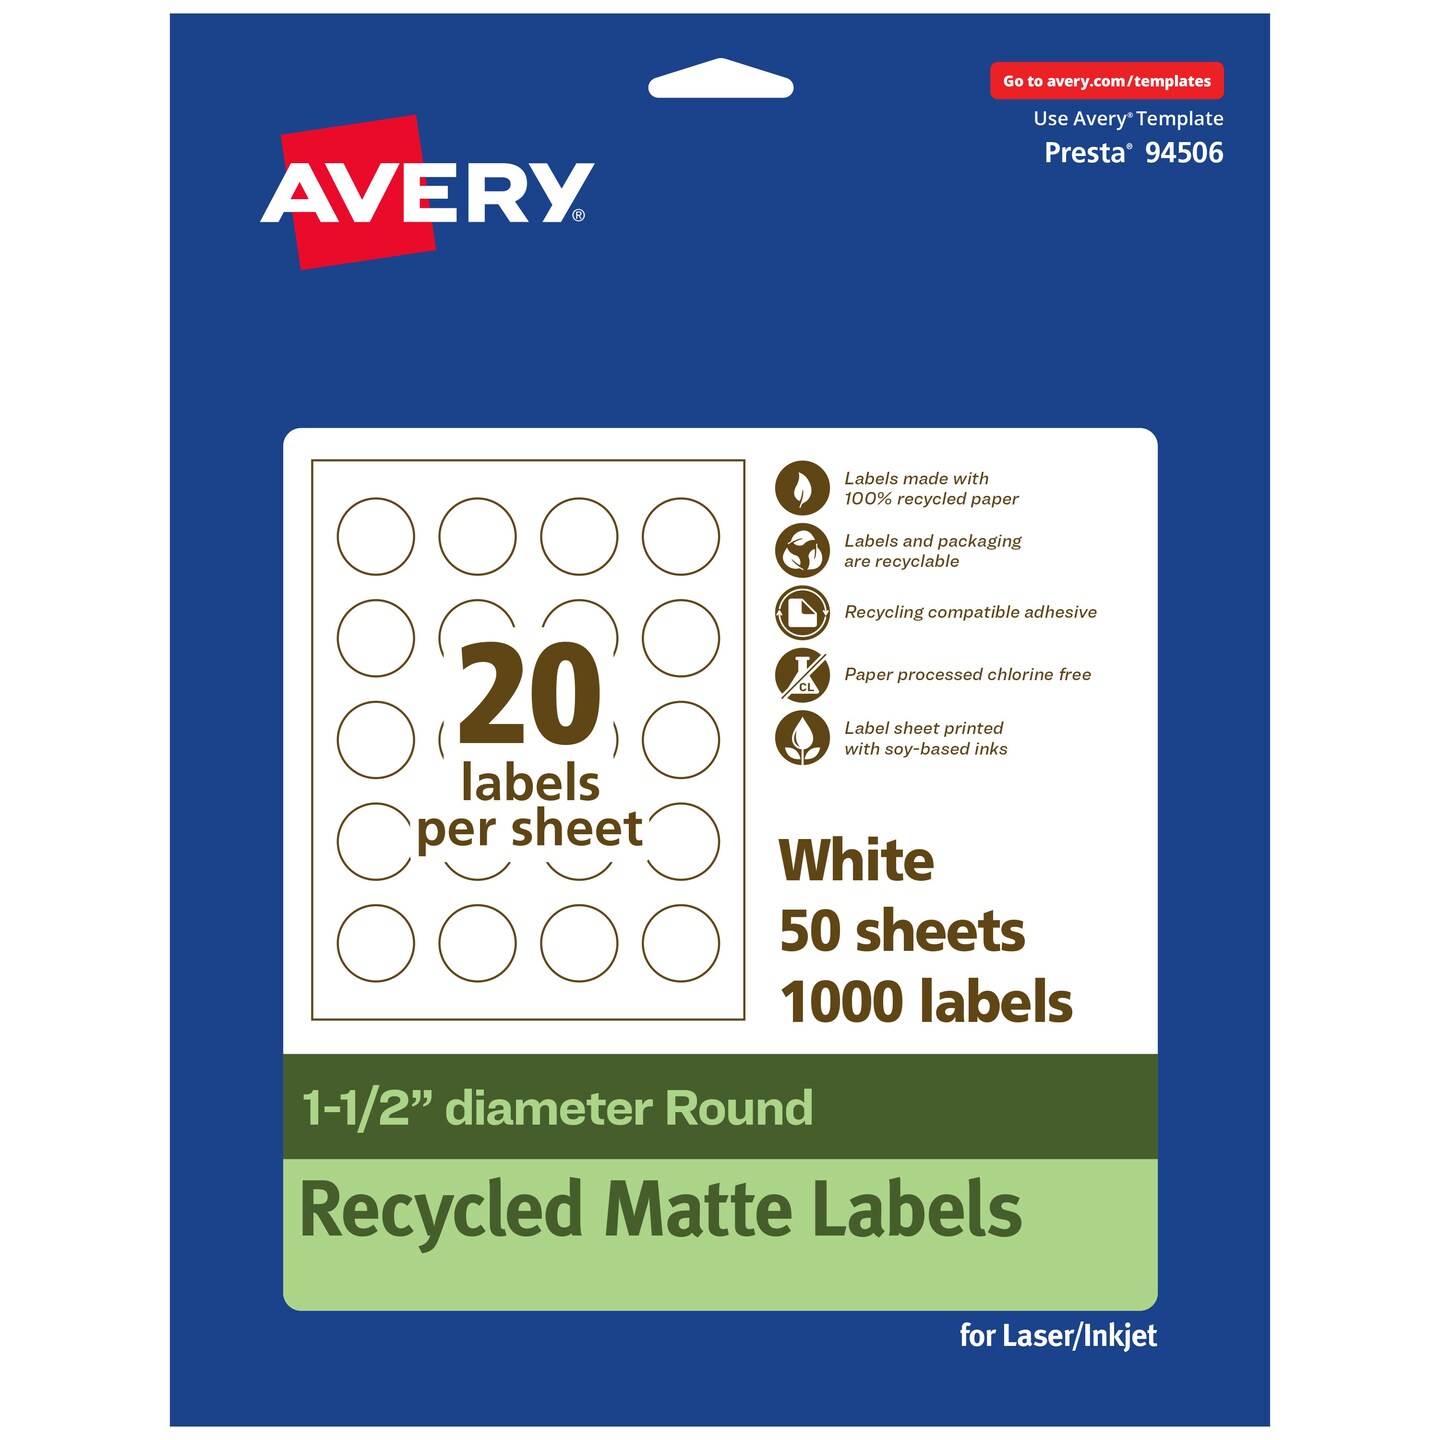 Avery Recycled Matte White Labels,  1-1/2" diameter Round